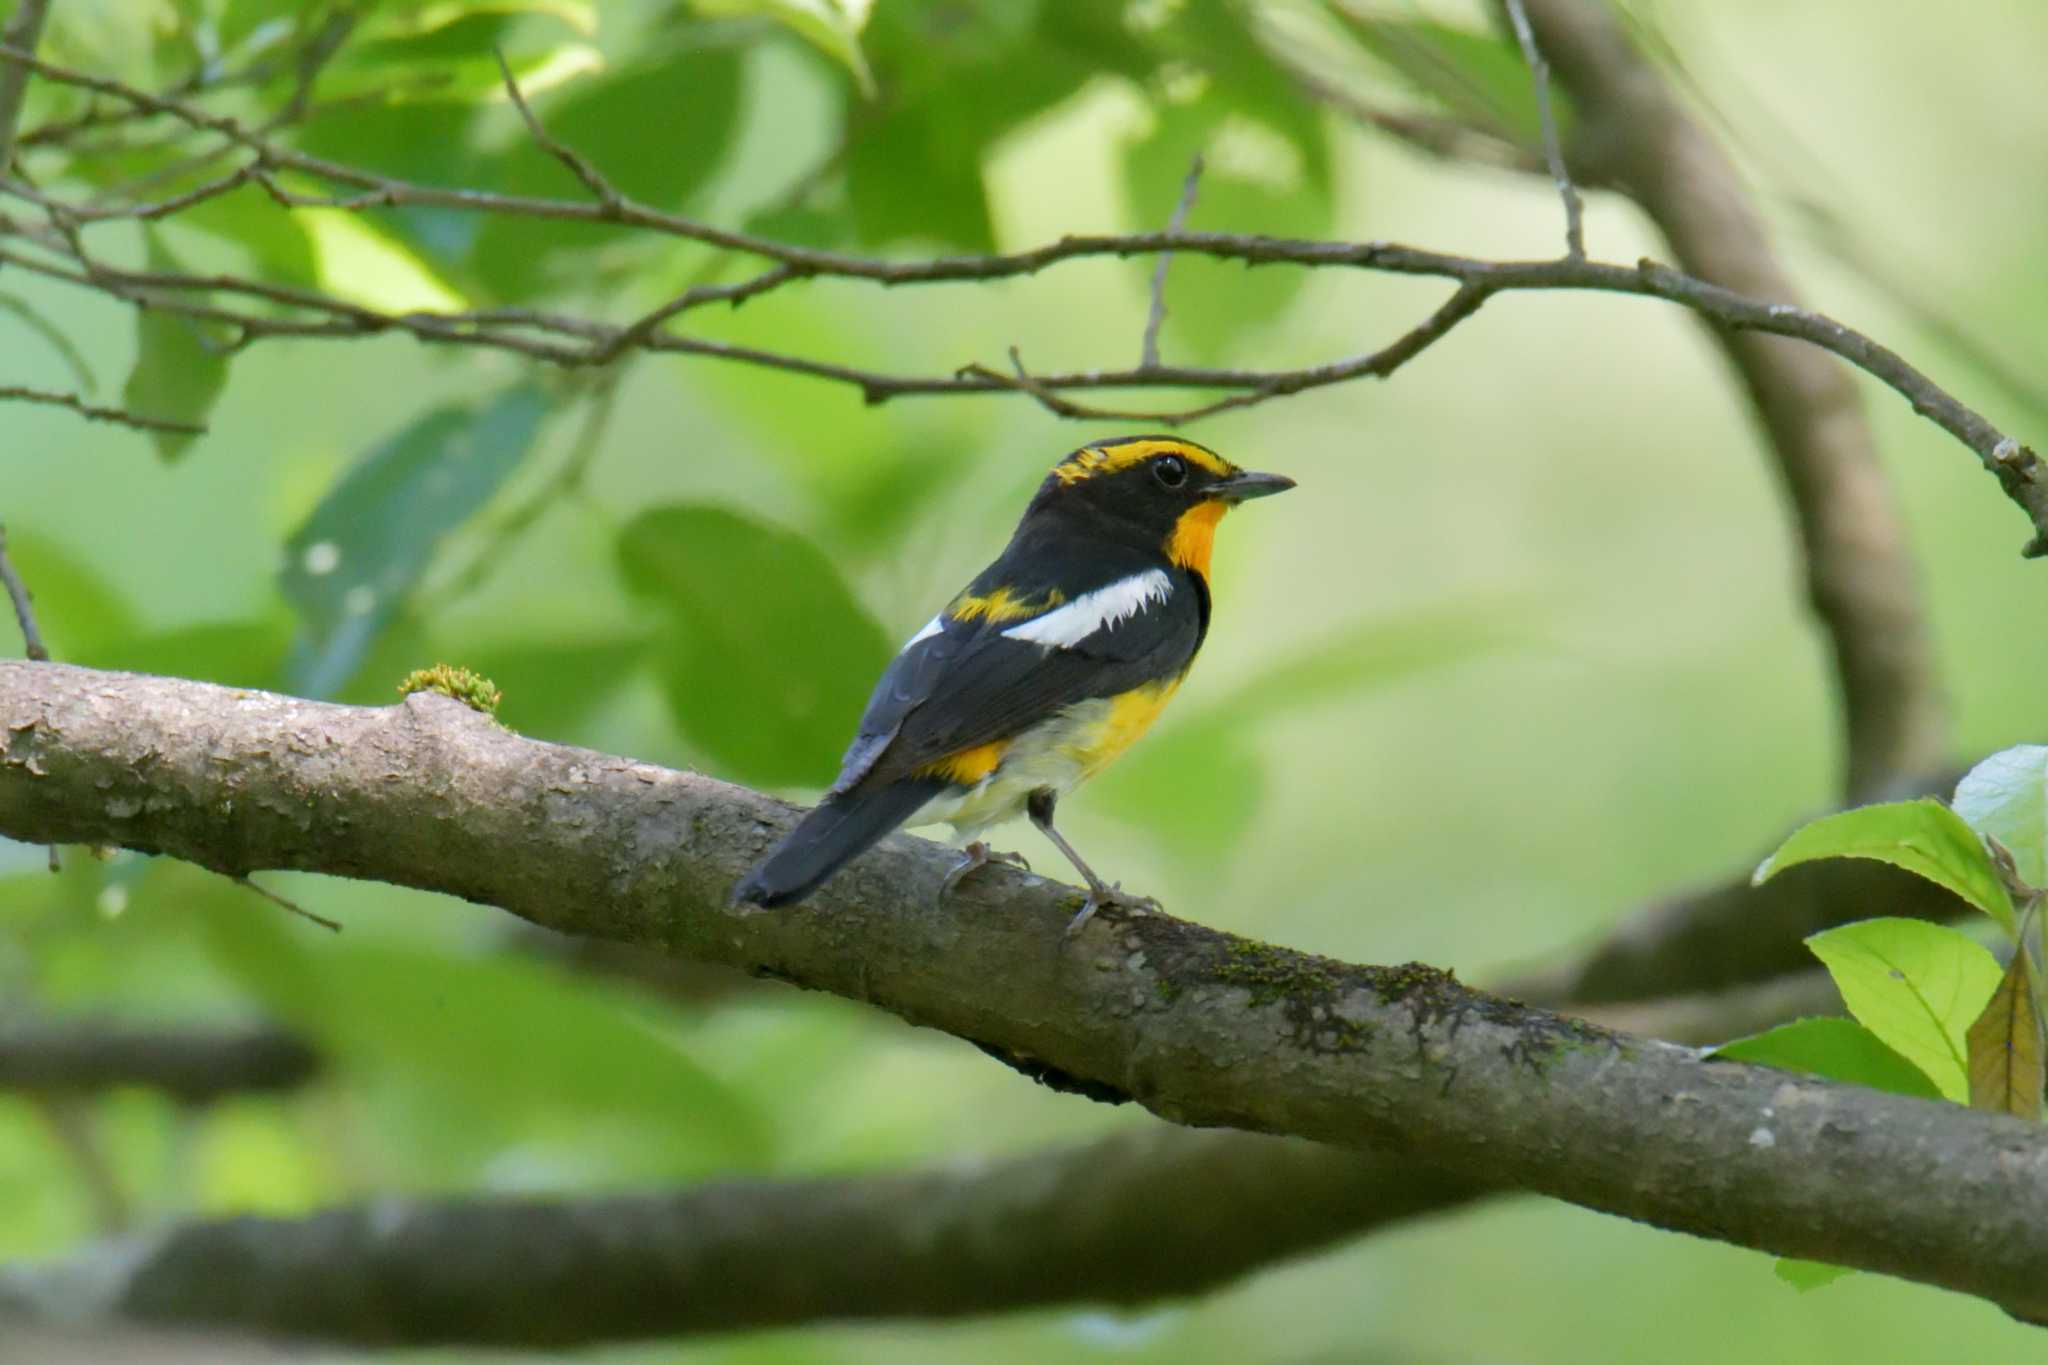 Photo of Narcissus Flycatcher at Mie-ken Ueno Forest Park by masatsubo